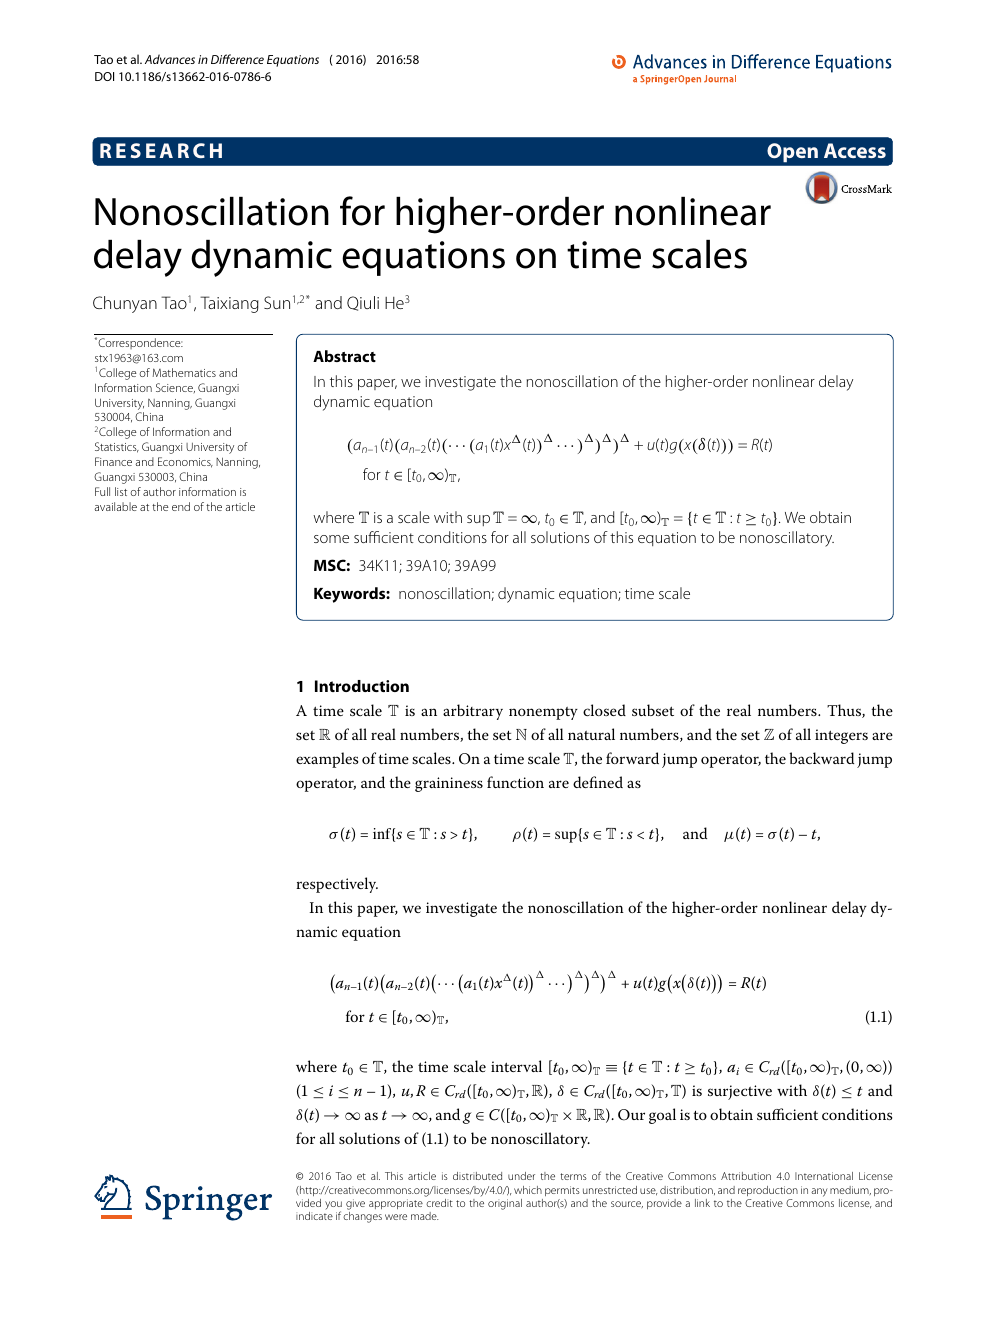 Nonoscillation For Higher Order Nonlinear Delay Dynamic Equations On Time Scales Topic Of Research Paper In Mathematics Download Scholarly Article Pdf And Read For Free On Cyberleninka Open Science Hub